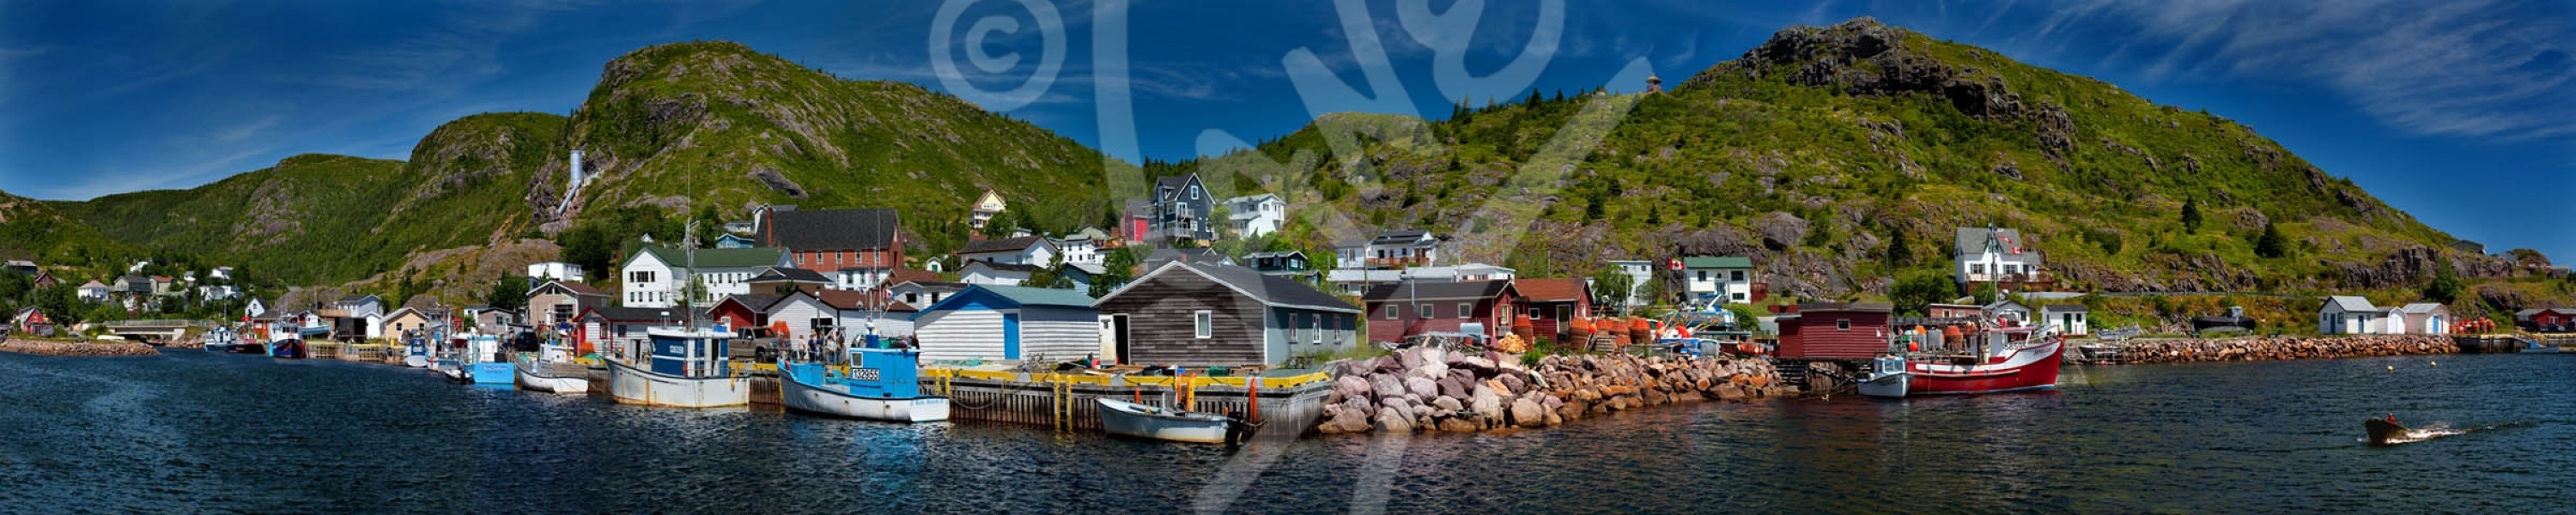 Petty Harbour, north side